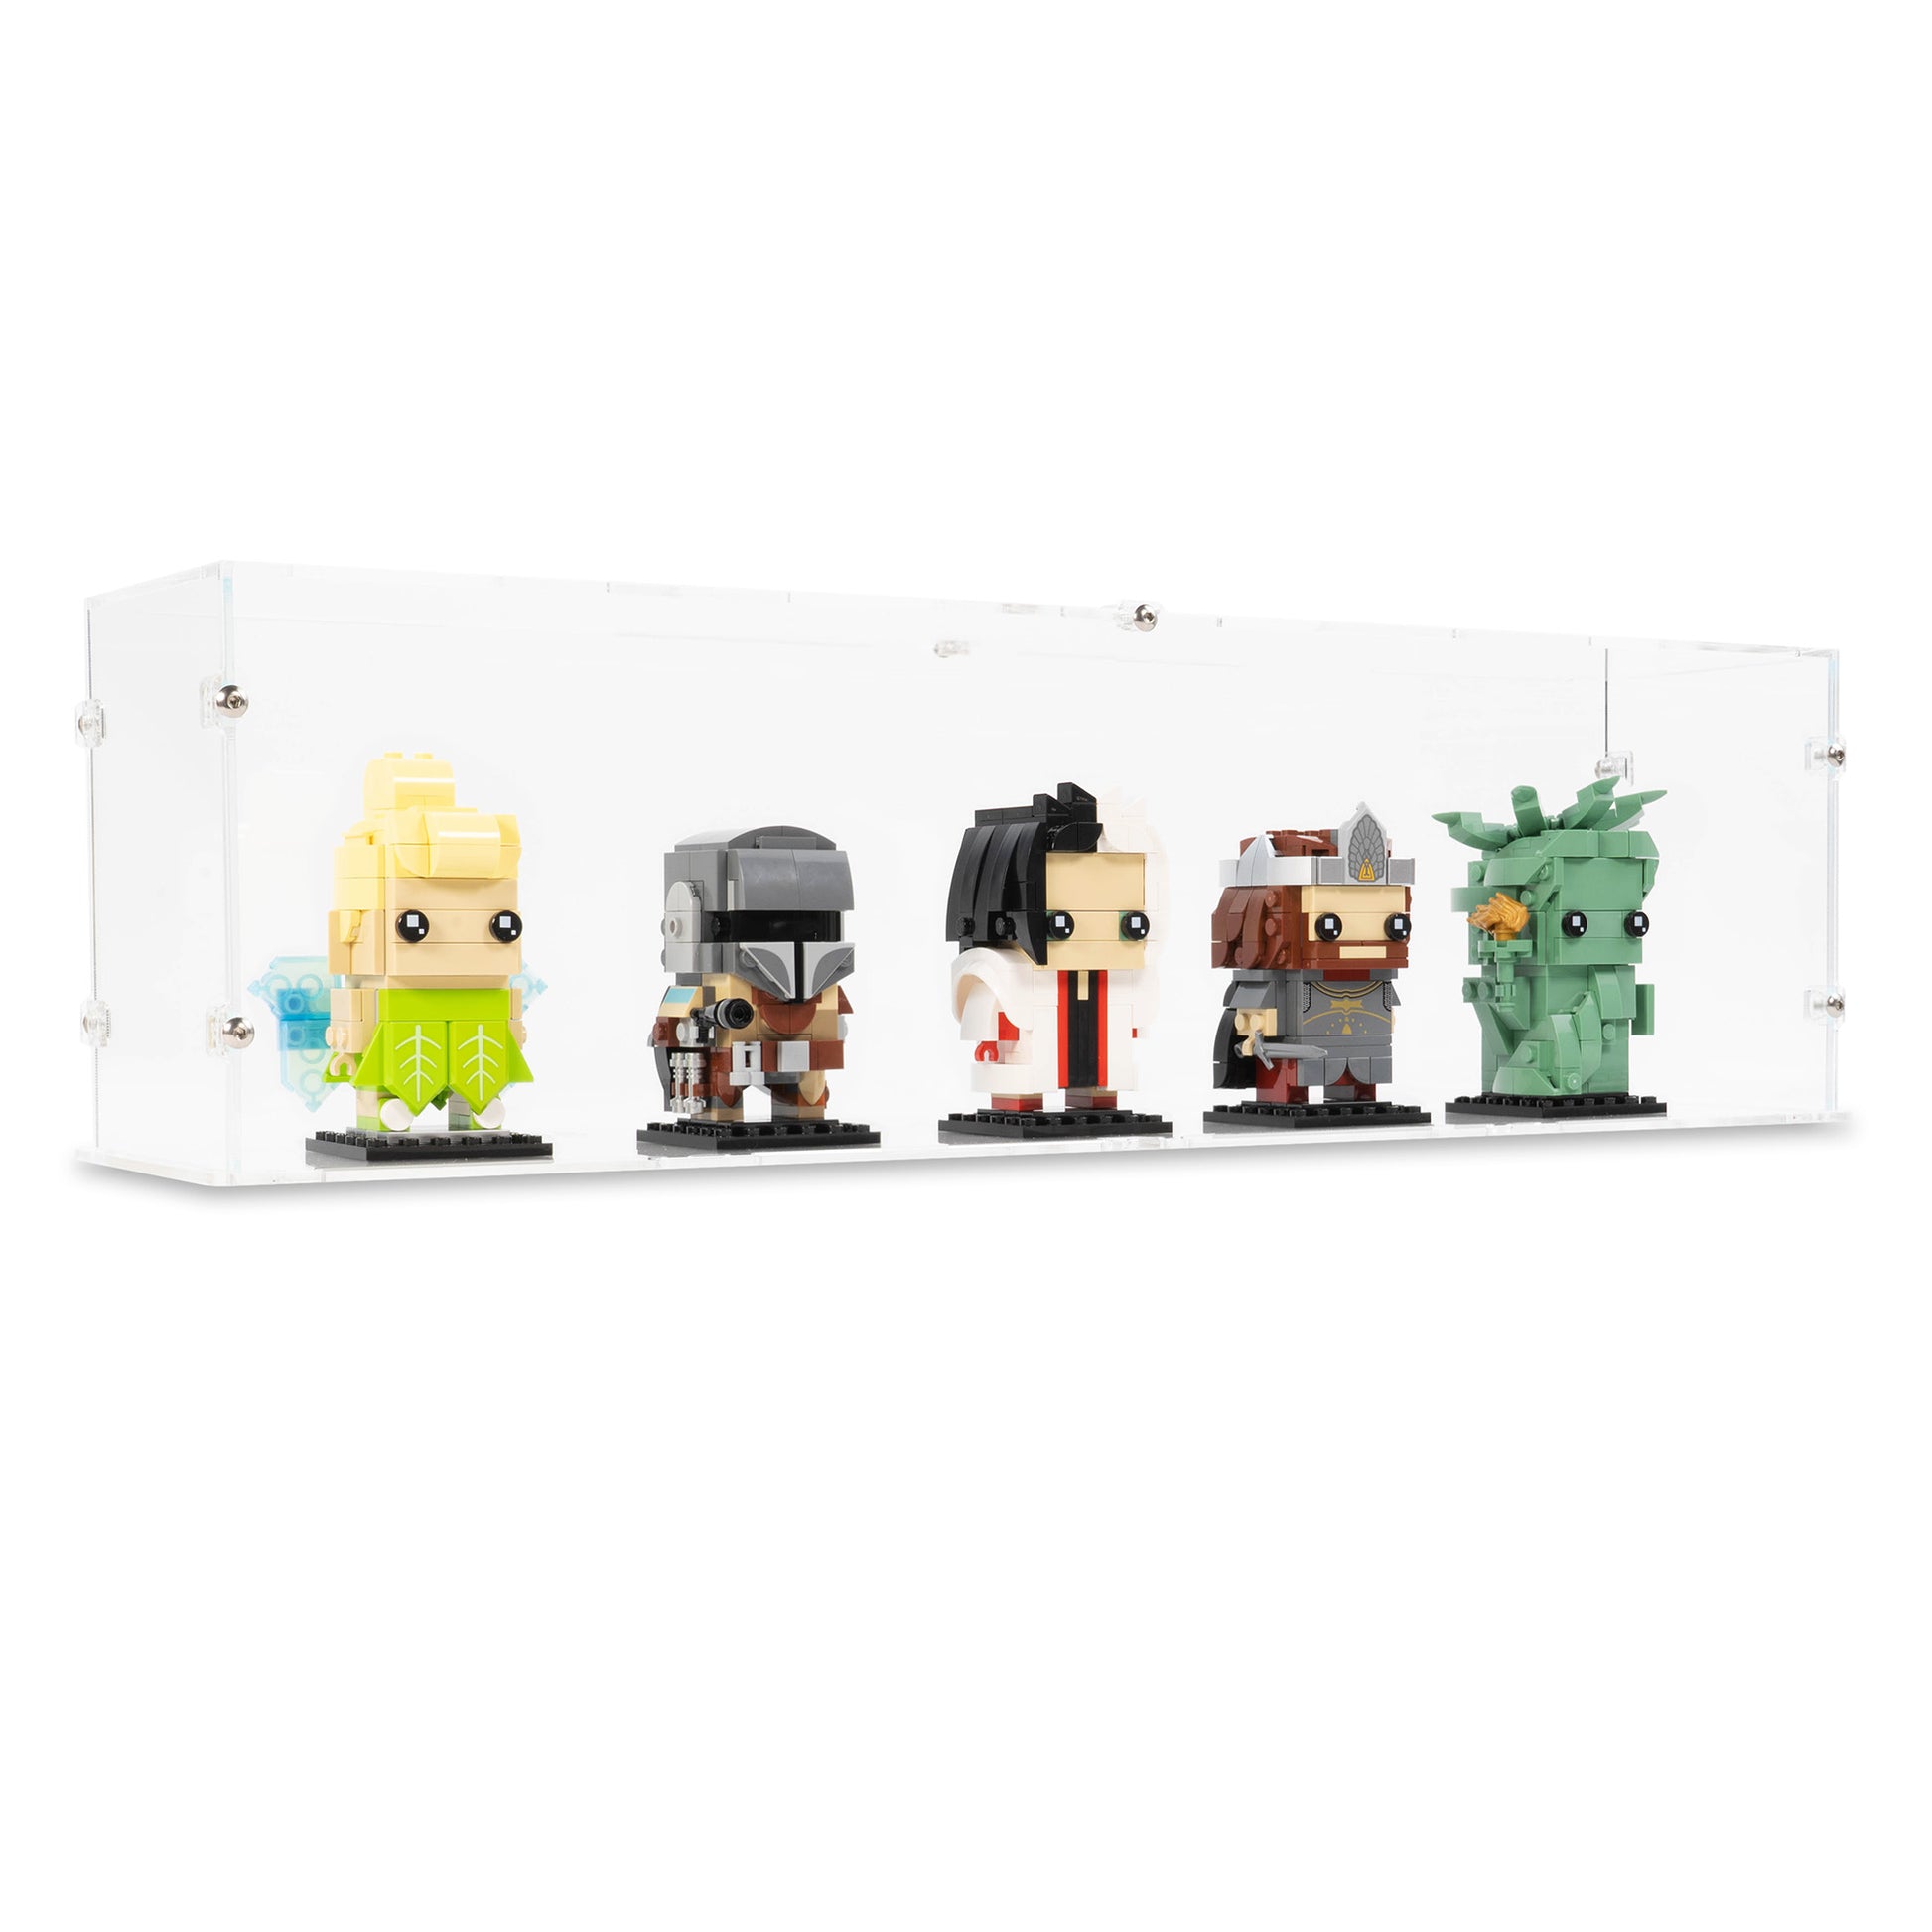 Angled view of 5x LEGO BrickHeadz Display Case with a Clear Base.